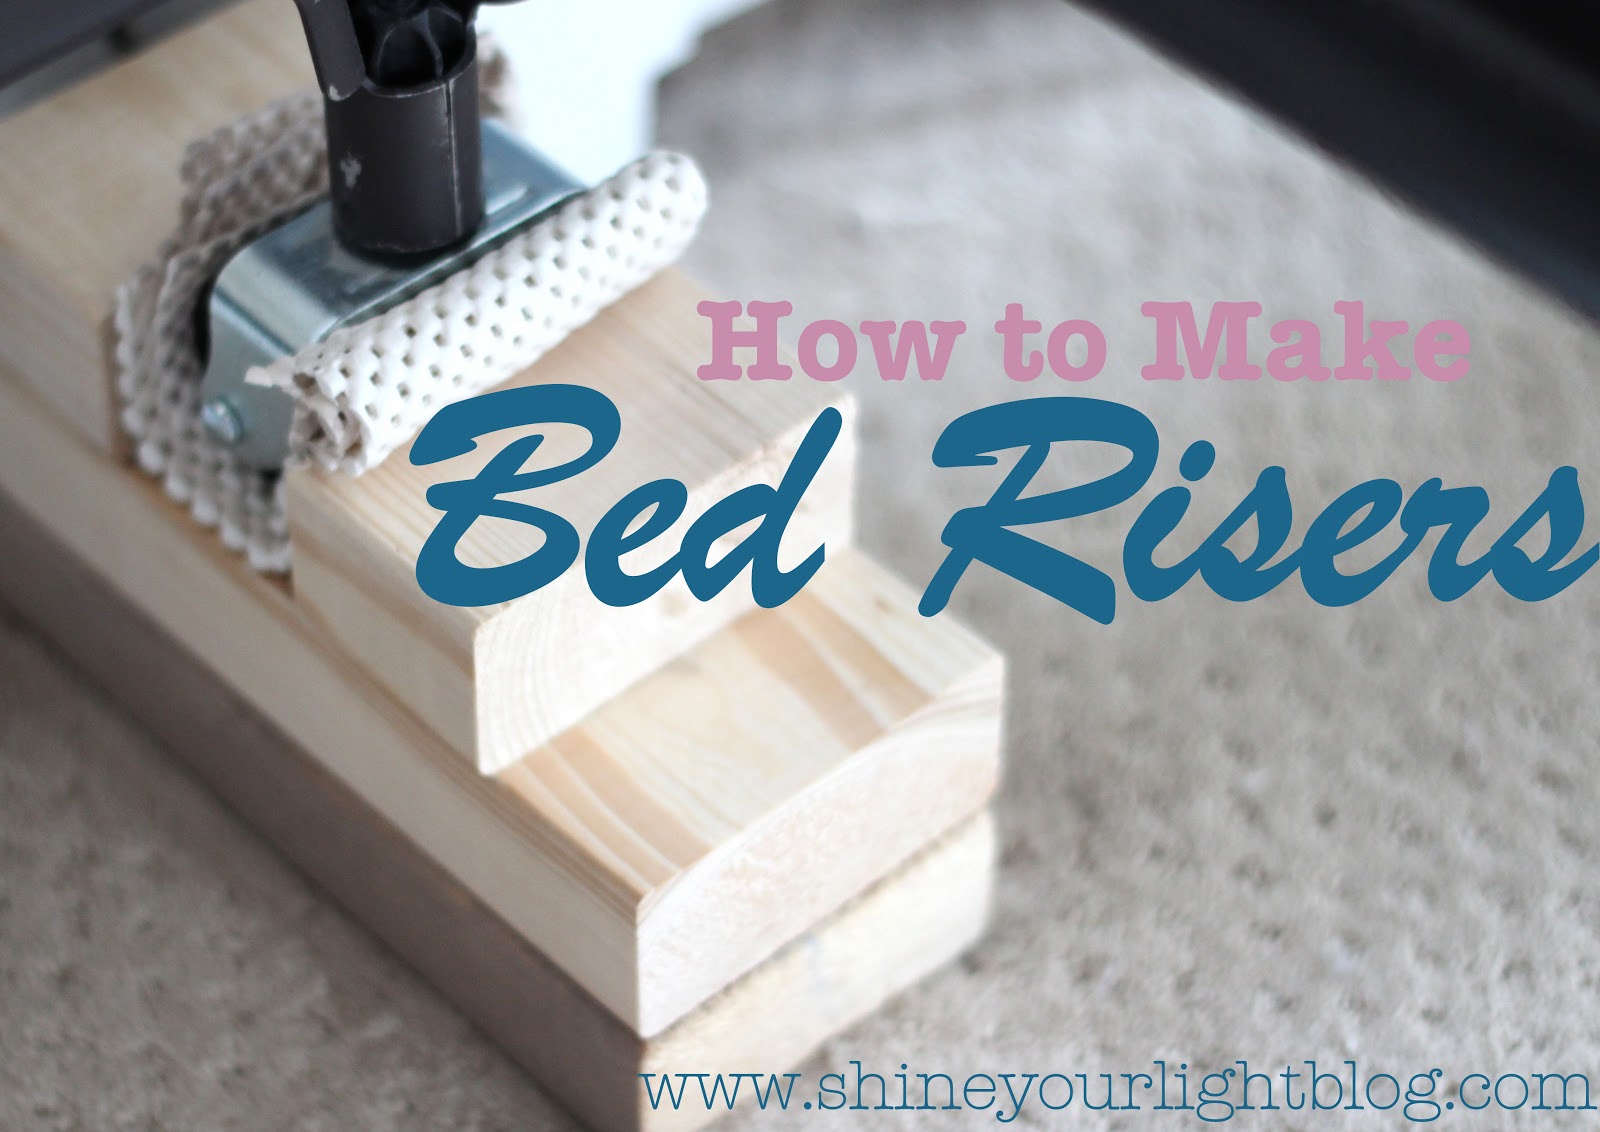 How To Make Simple Wooden Bed Risers Shine Your Light